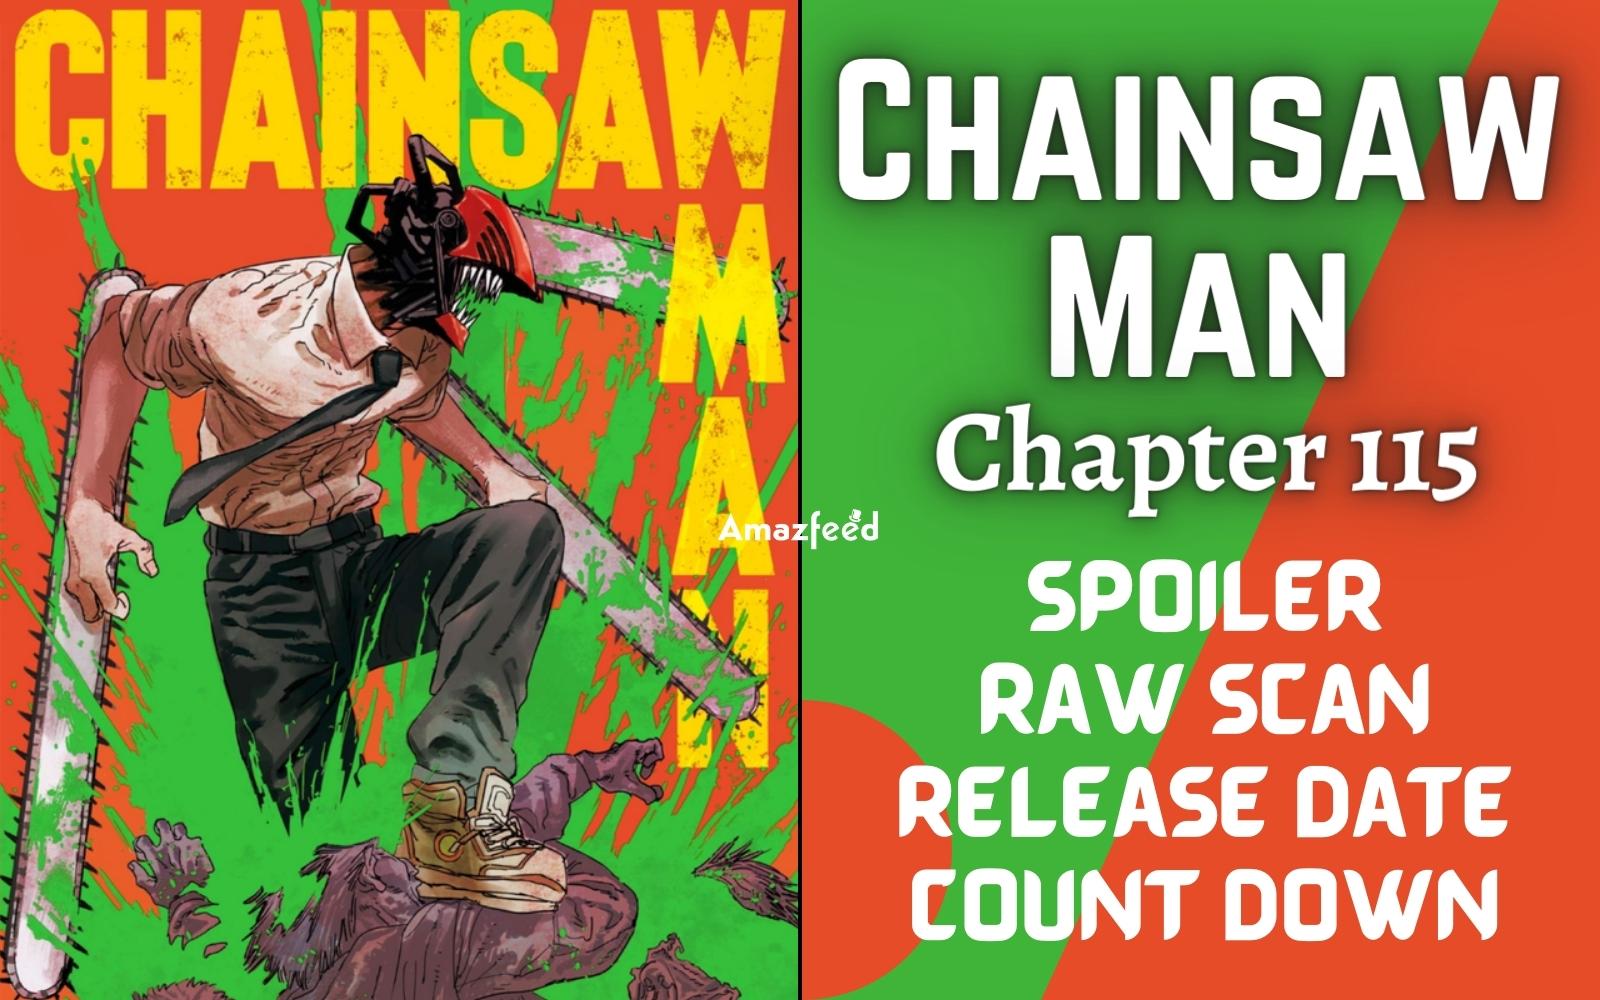 Chainsaw Man chapter 115: Release date and time, what to expect, and more